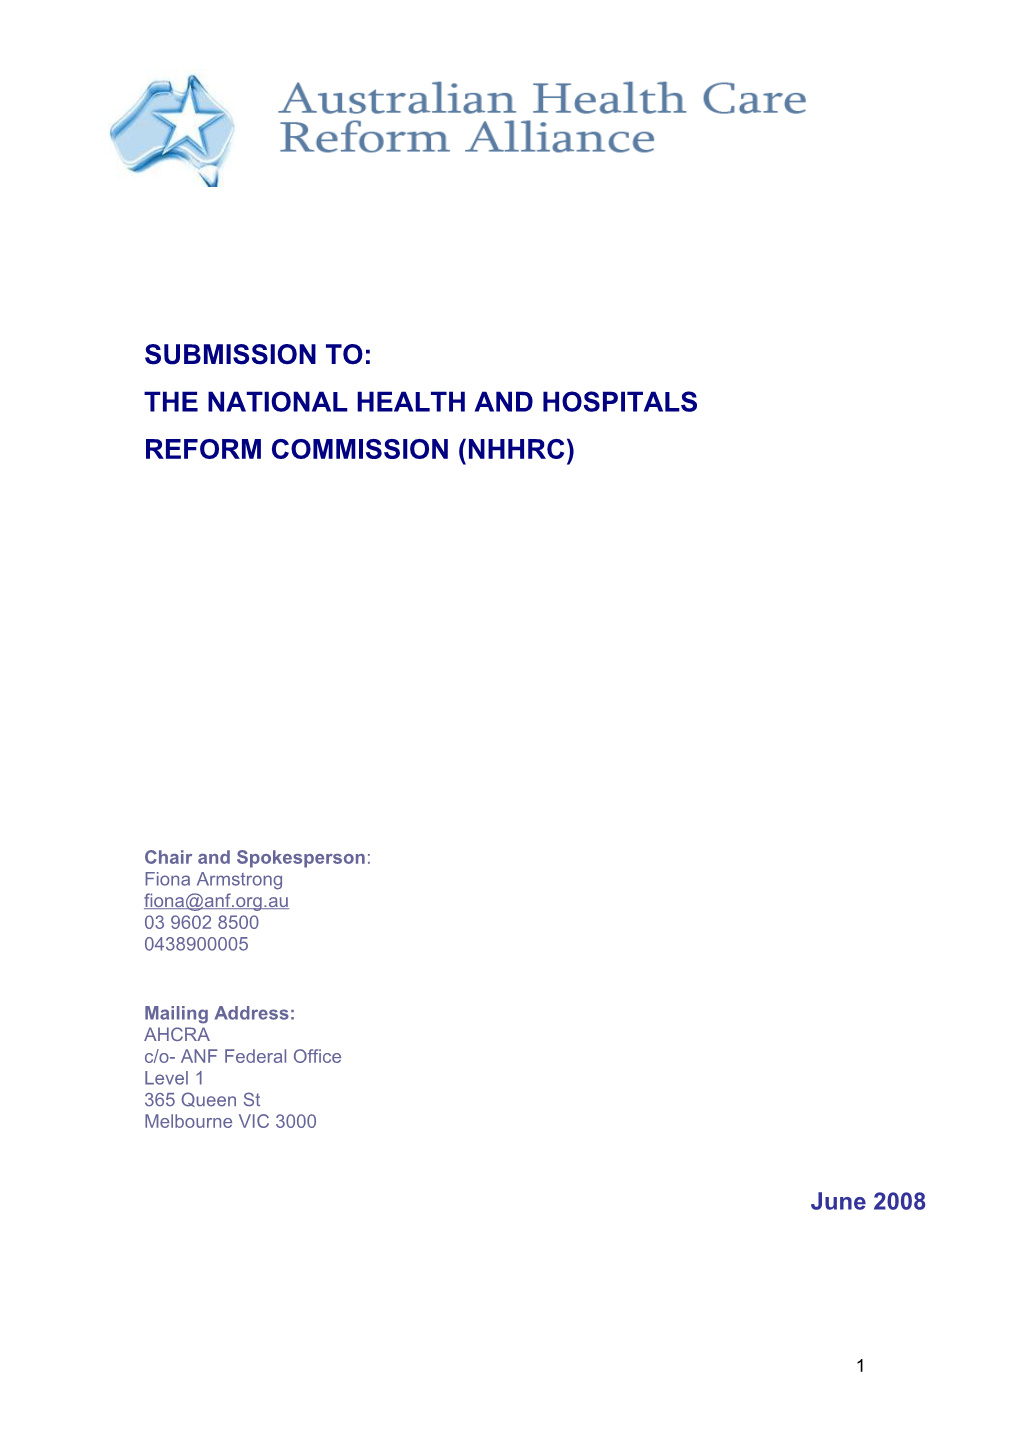 The National Health and Hospitals